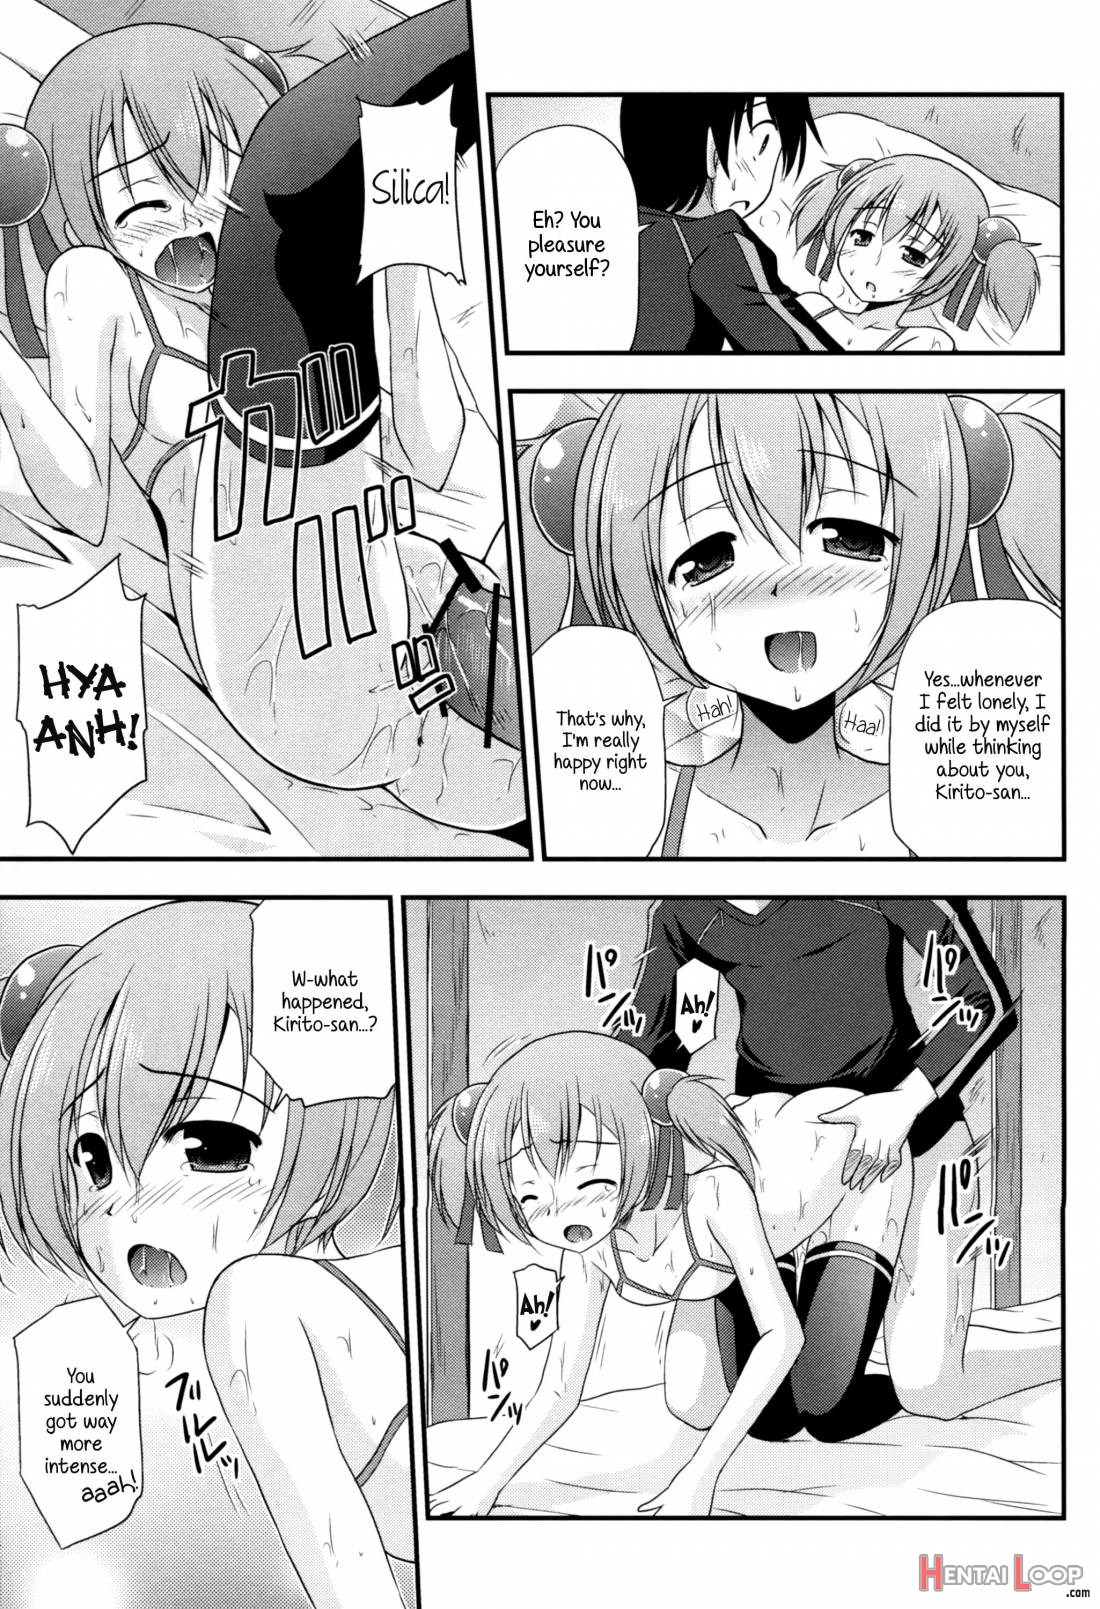 Silica Route Online page 19